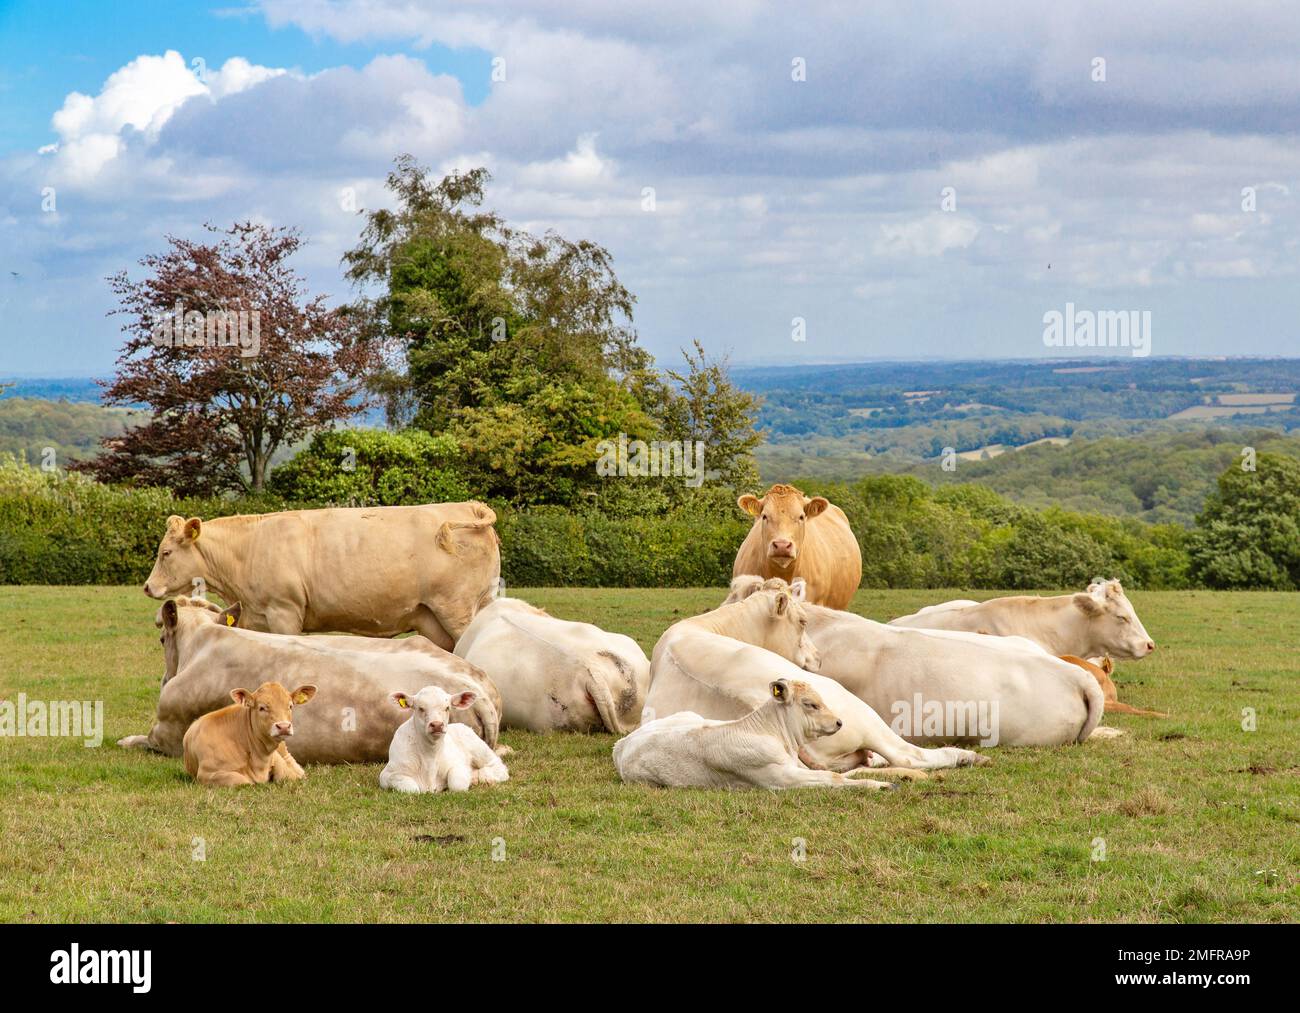 A herd of cows relaxing in a farmer's field, Sussex, UK Stock Photo